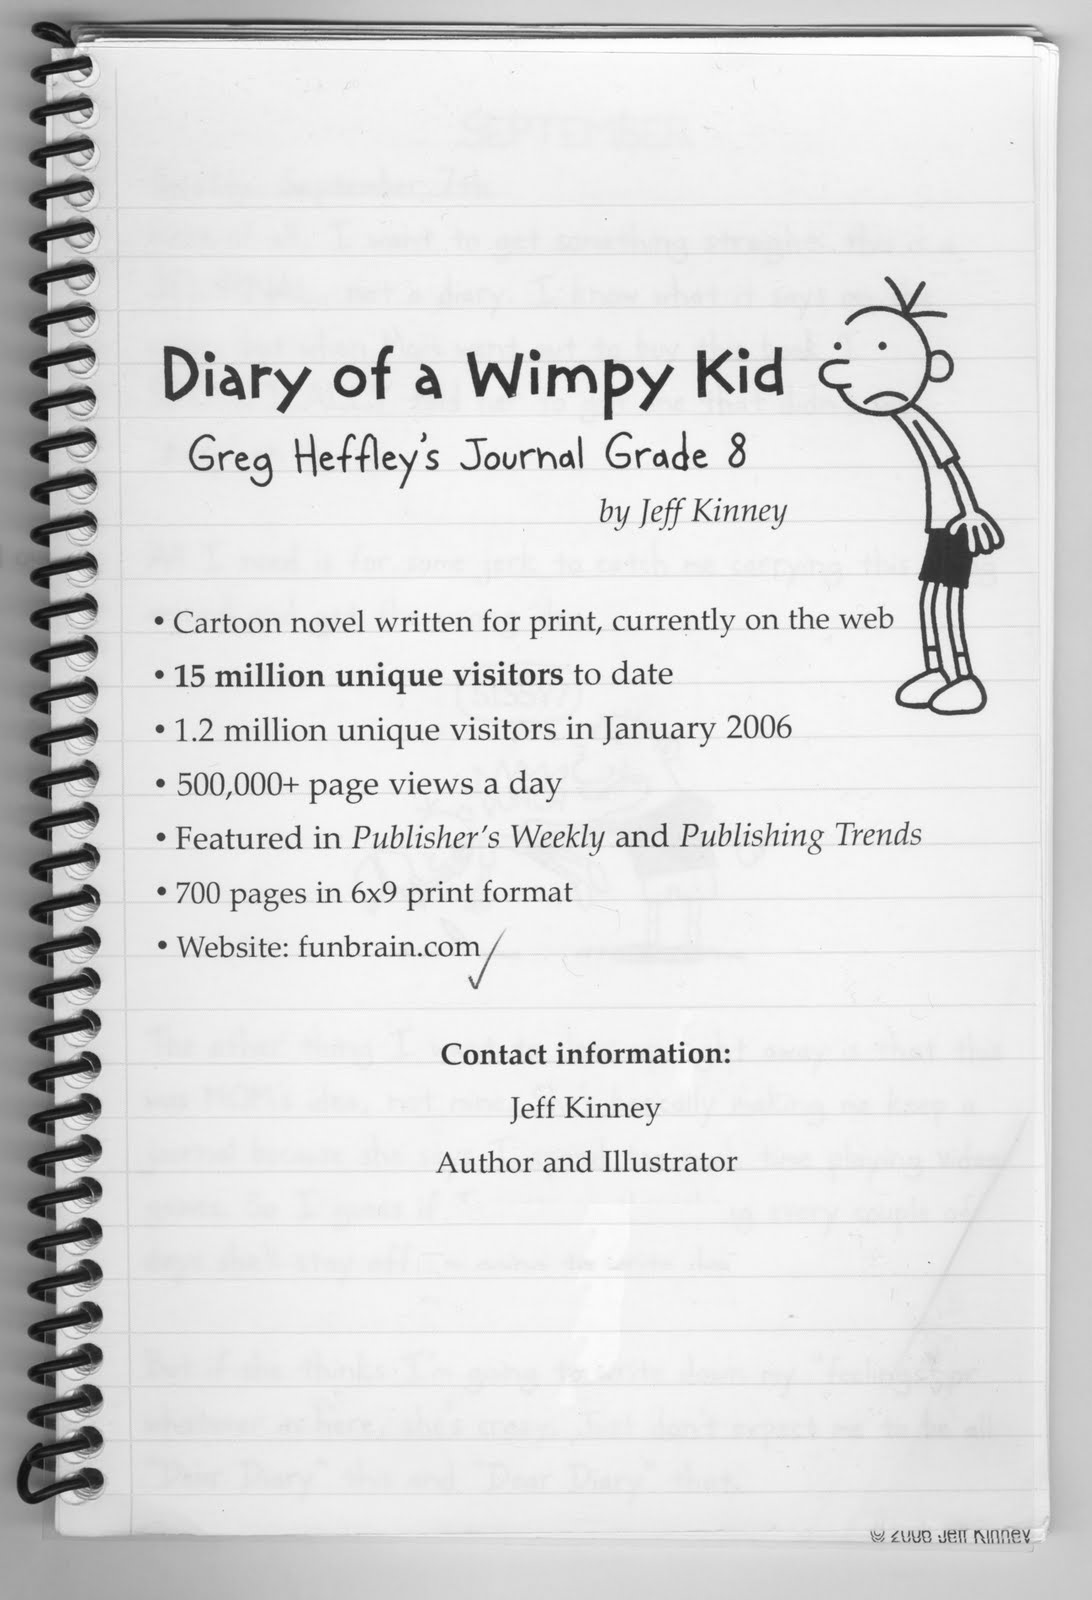 Mishaps and Adventures: A Look Back on Diary of a Wimpy Kid the Book ...